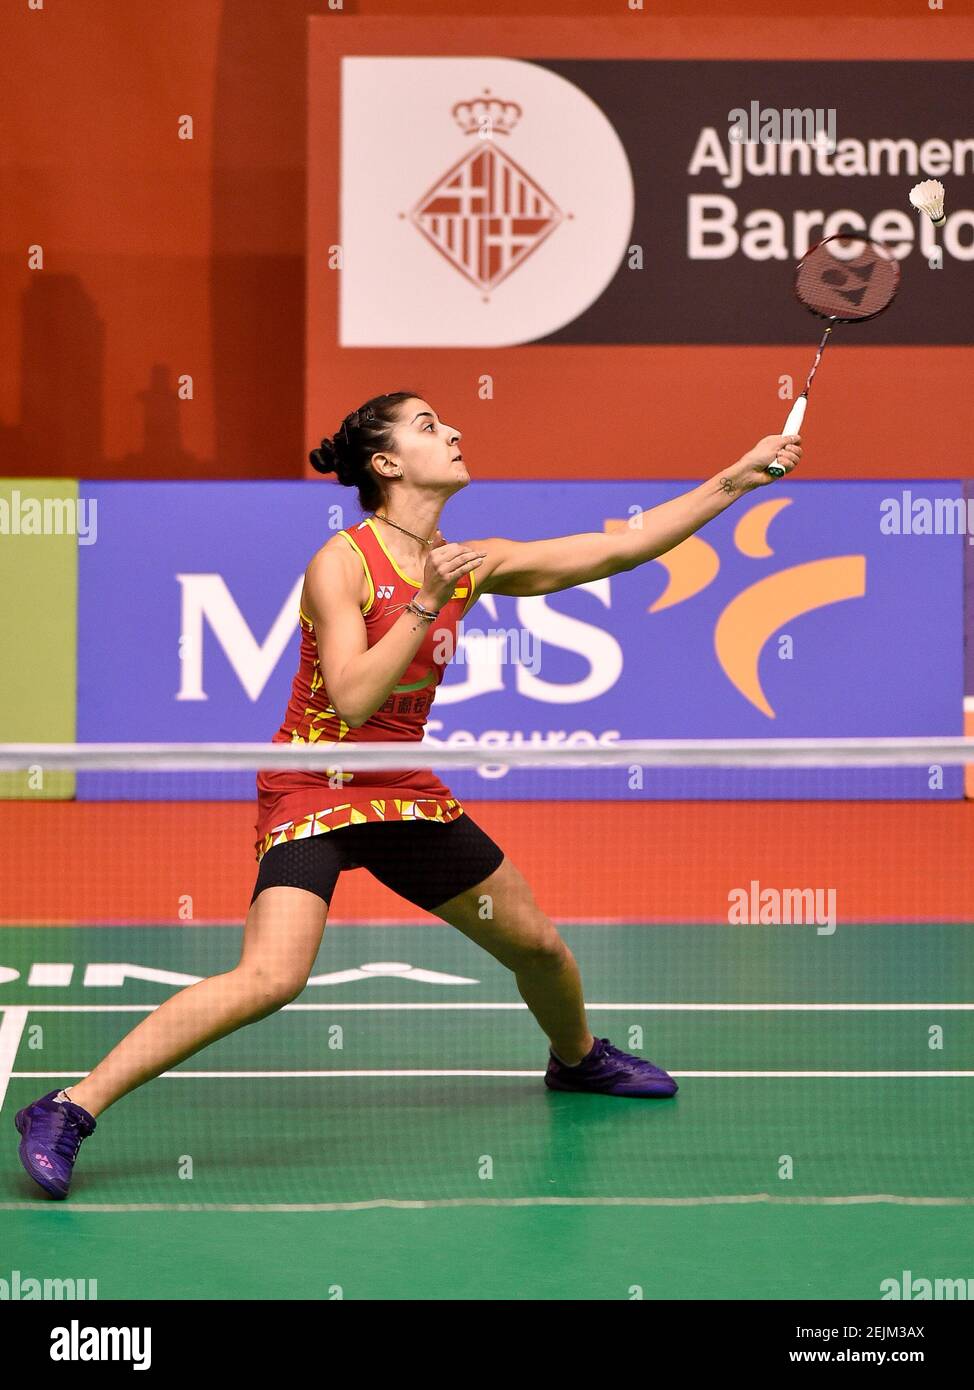 Barcelona Spain Master 2020 - Day 3;.Carolina Marin of Spain competes in  the Women's Singles qualification round 2 match against Soraya De Visch  Eijbergen of Netherland on day three of the Barcelona